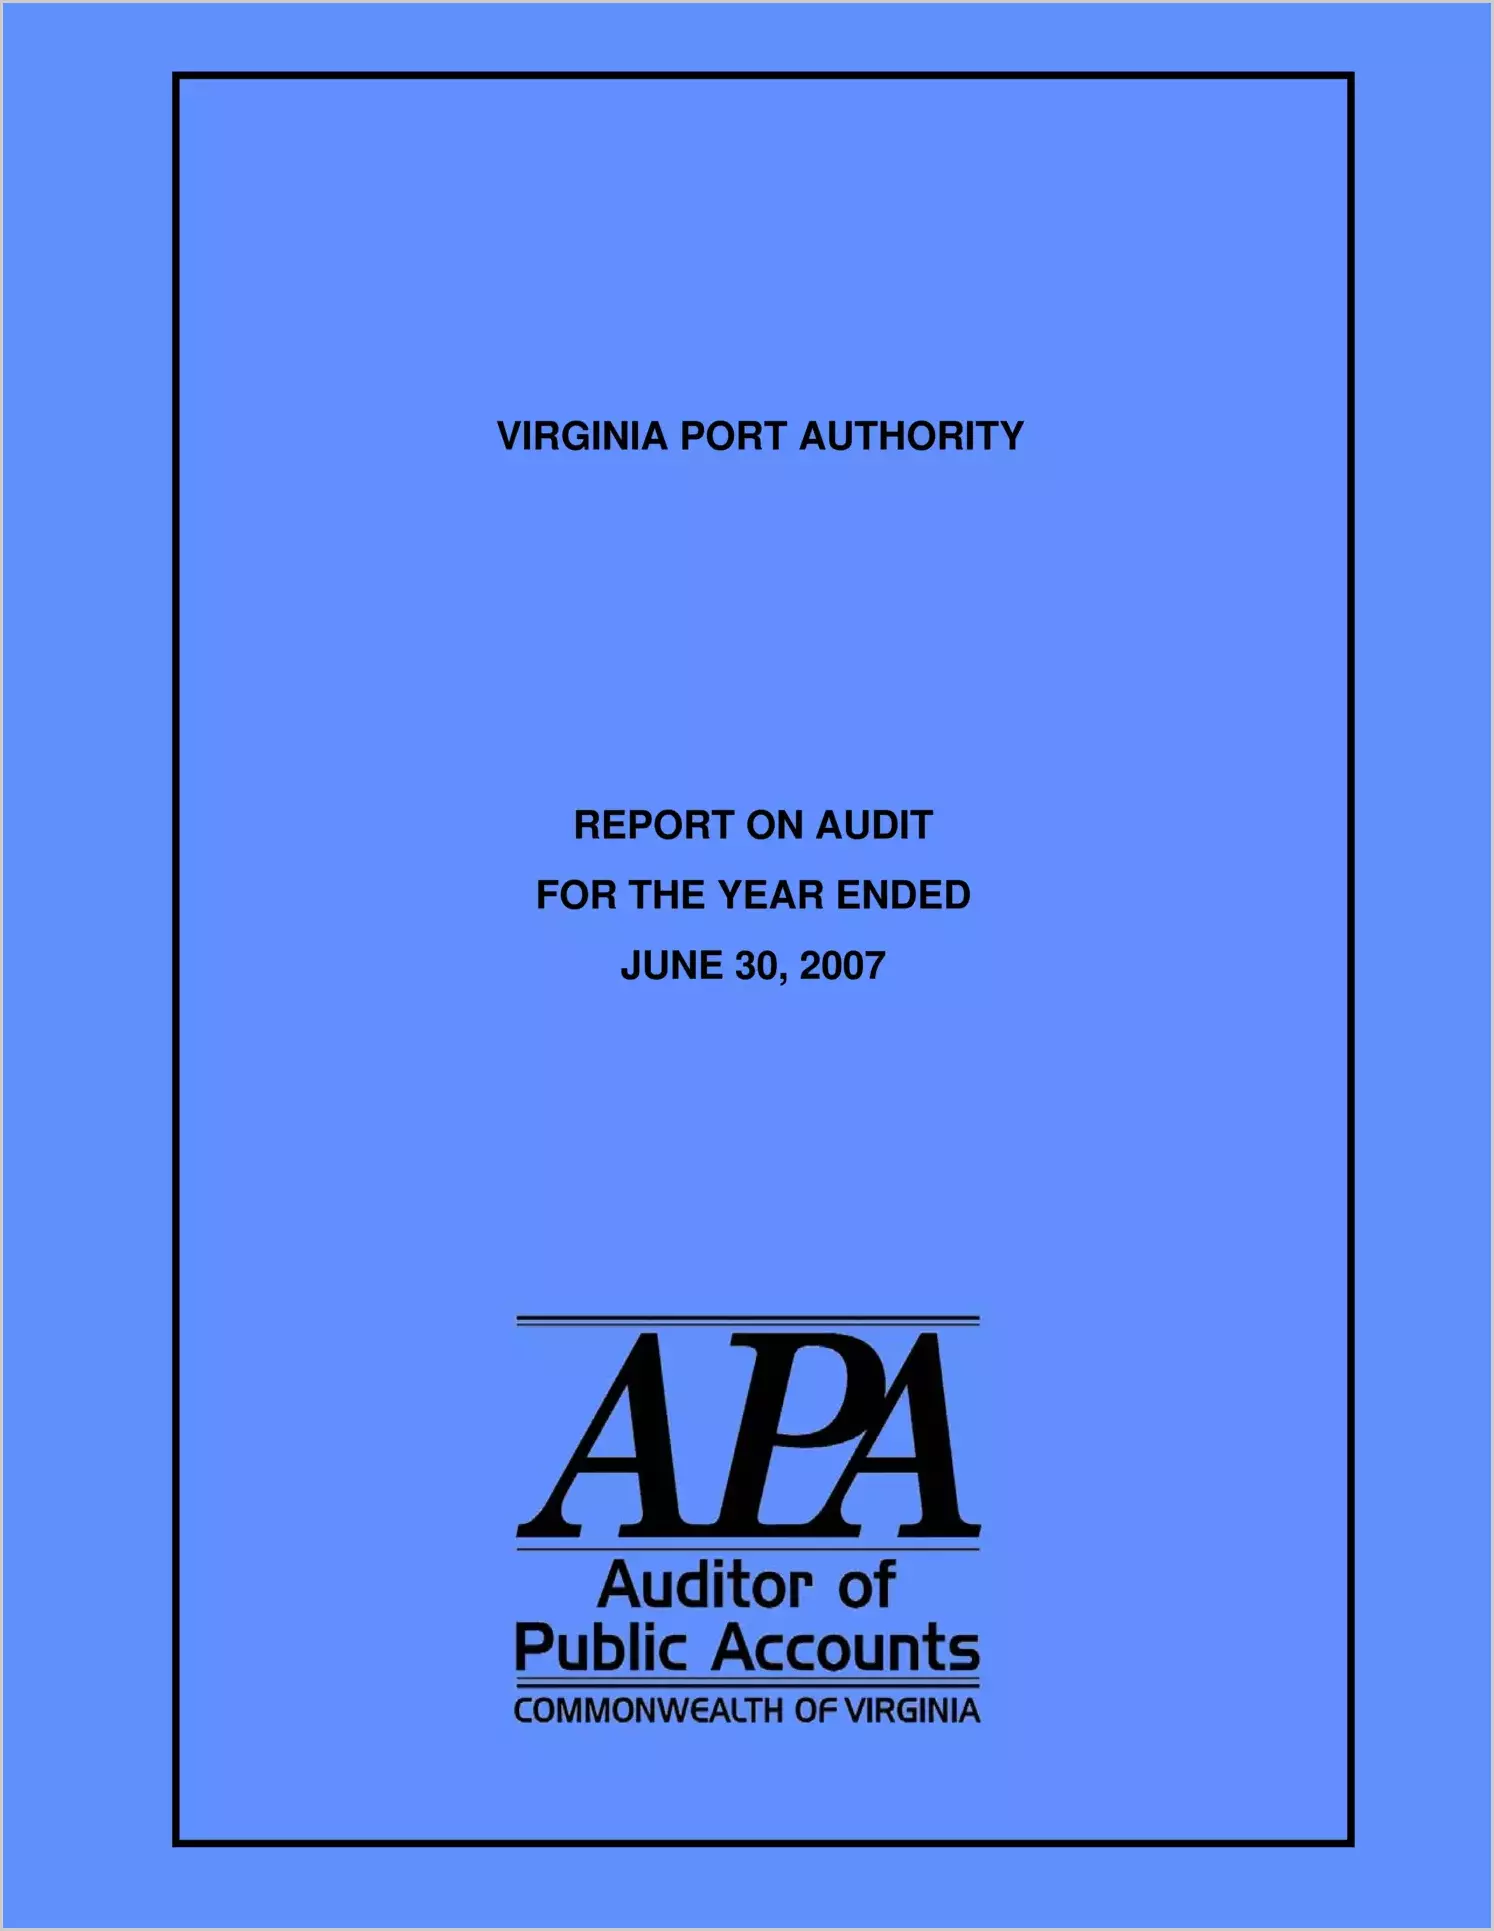 Virginia Port Authority for the year ended June 30, 2007